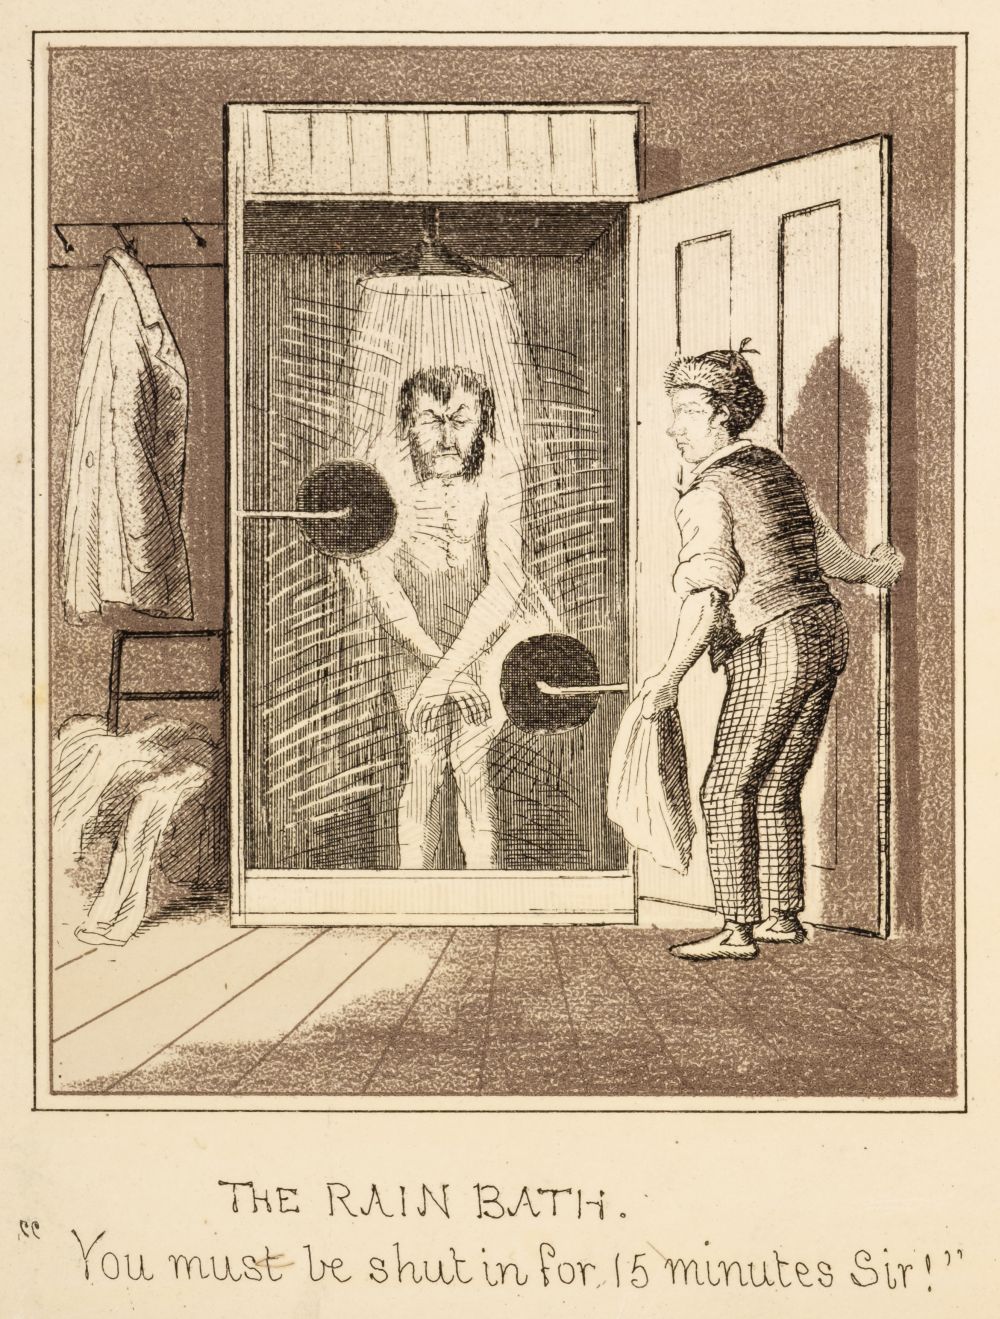 Onwhyn (Thomas, illustrator). Recollections of the Water Cure, circa 1860